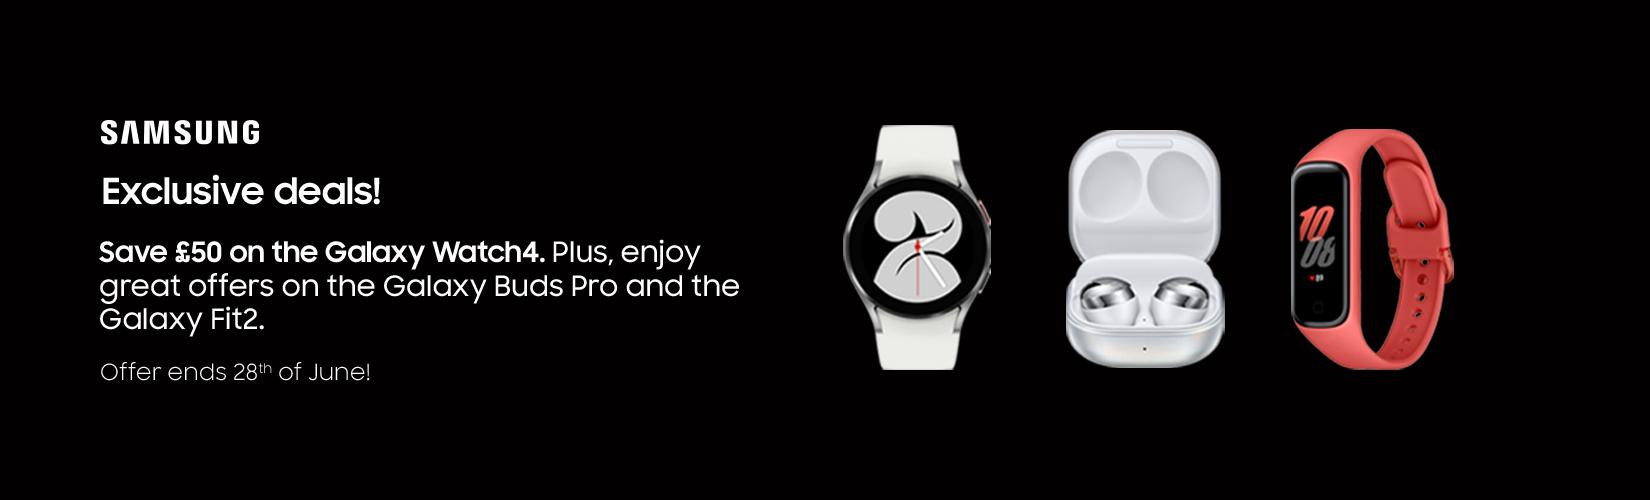 Samsung. Exclusive deals! Save £50 on the galaxy watch4, plus, enjoy great offers on the Galaxy Buds Pro and the Galaxy Fit2.